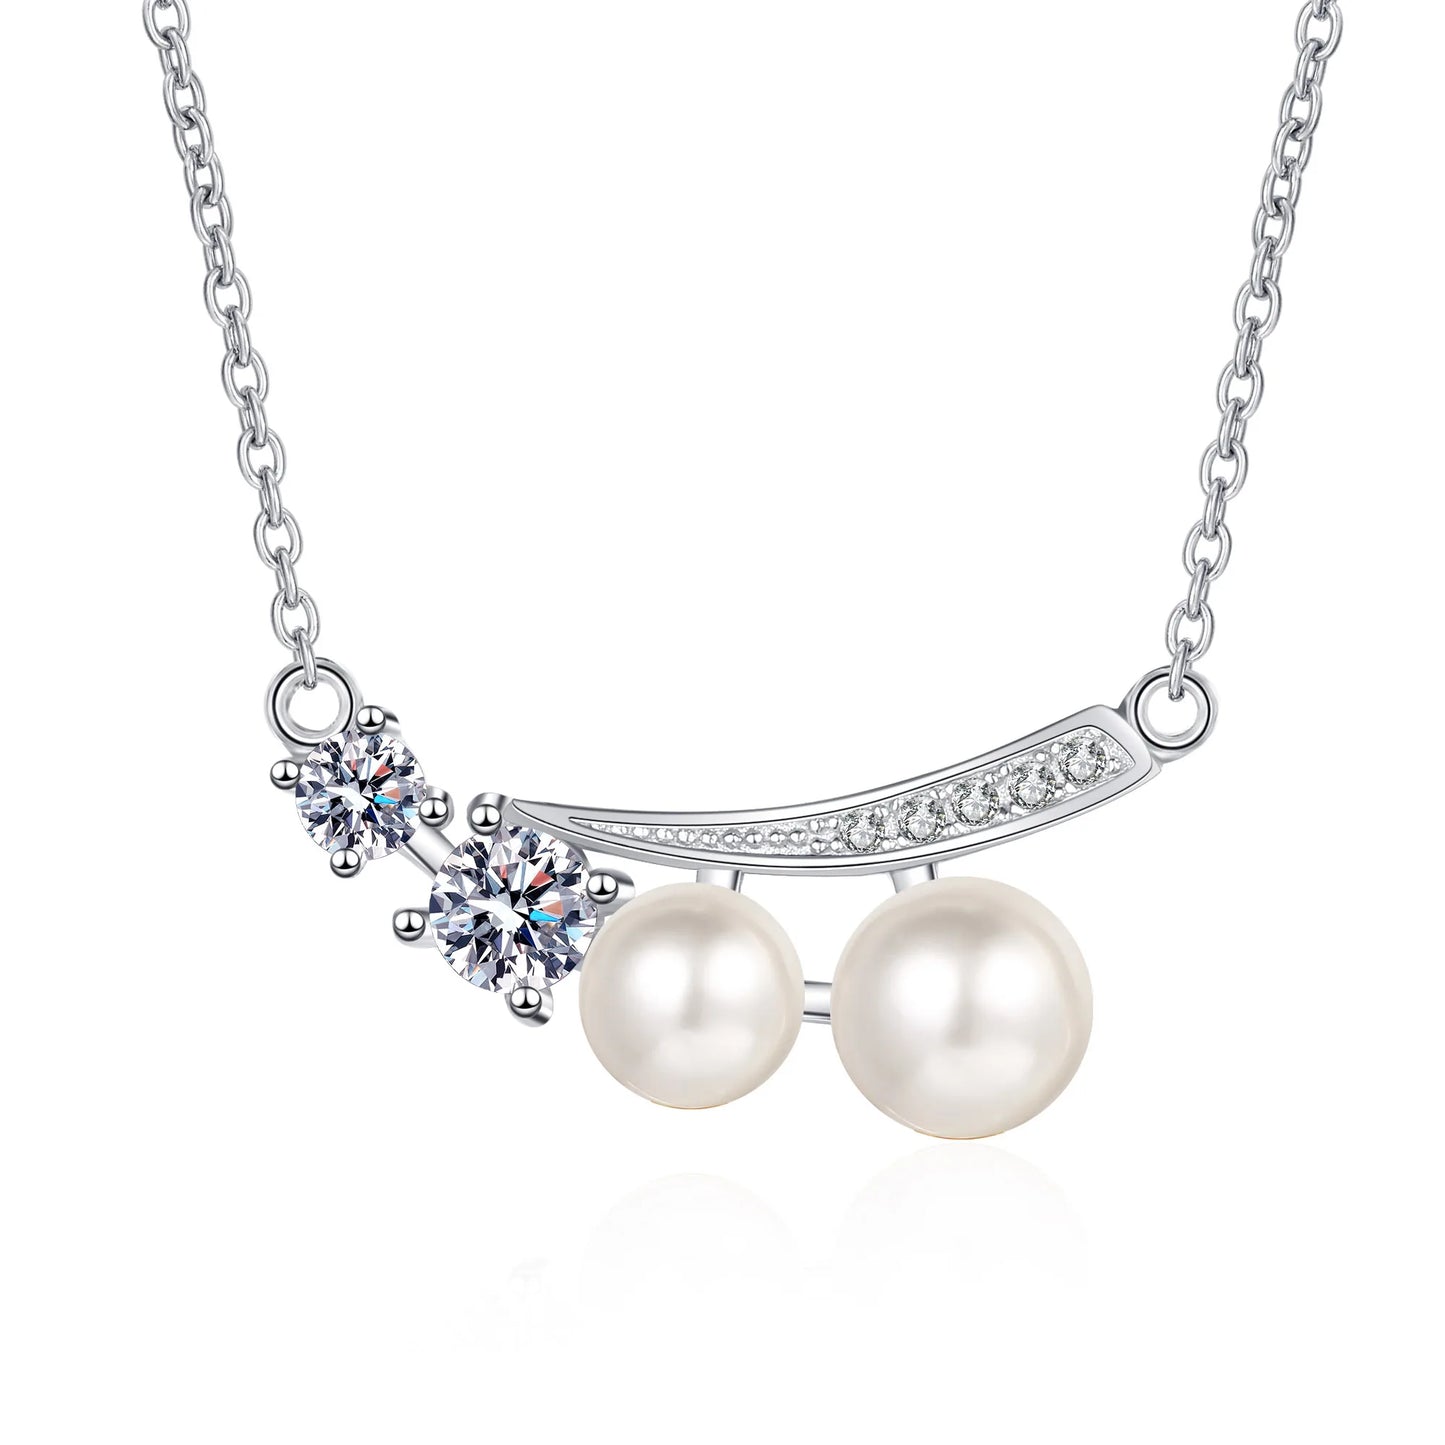 5mm ,7mm Pearls with 0.43ct Moissanites Pendant and Necklace in Platinum Plated 925 Silver